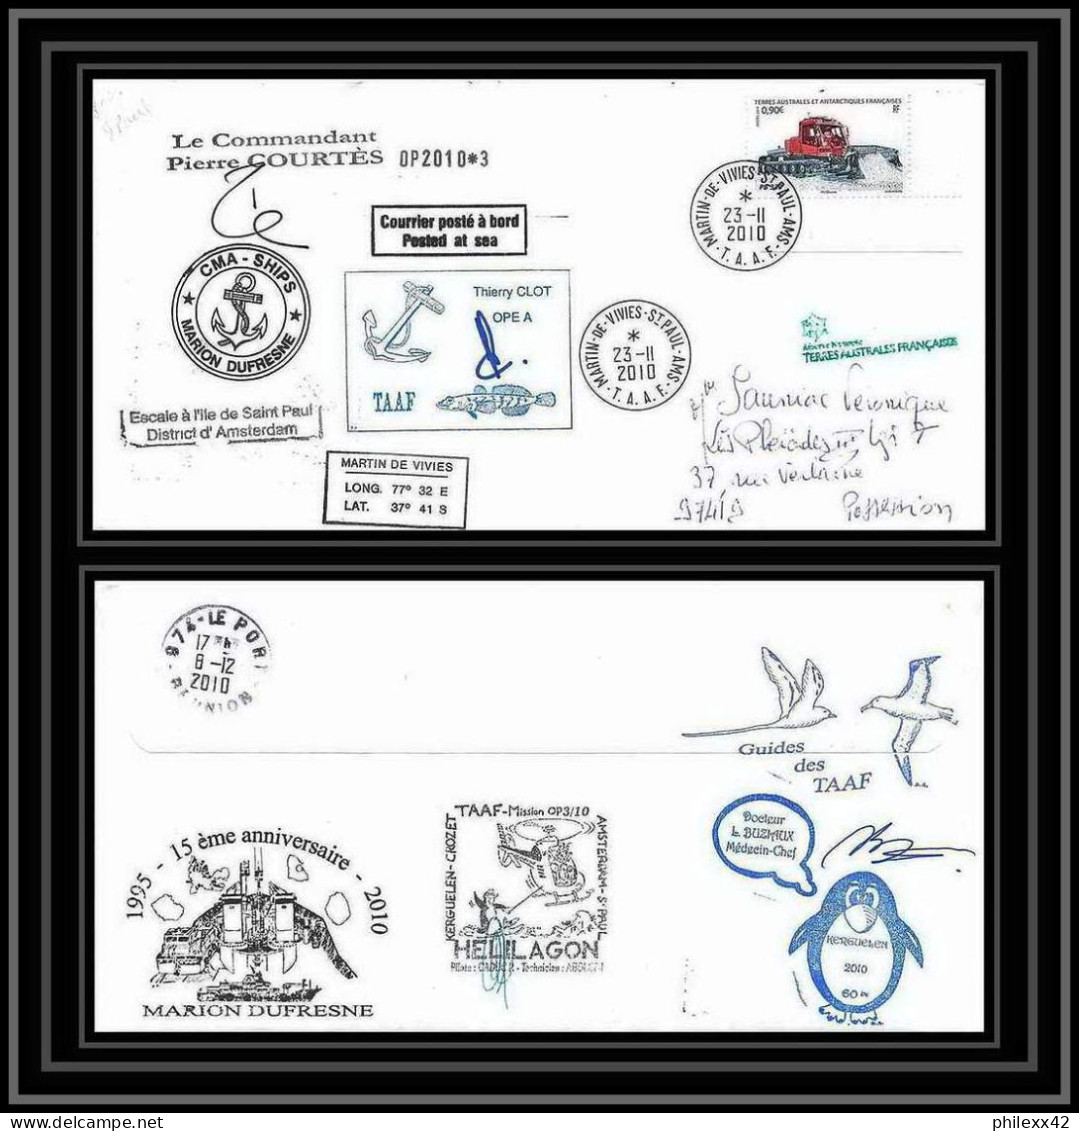 3046 Helilagon Dufresne Signé Signed Op 23/11/2010/3 St Paul N°565 Coin De Feuille Terres Australes (taaf) Lettre Cover - Helicópteros